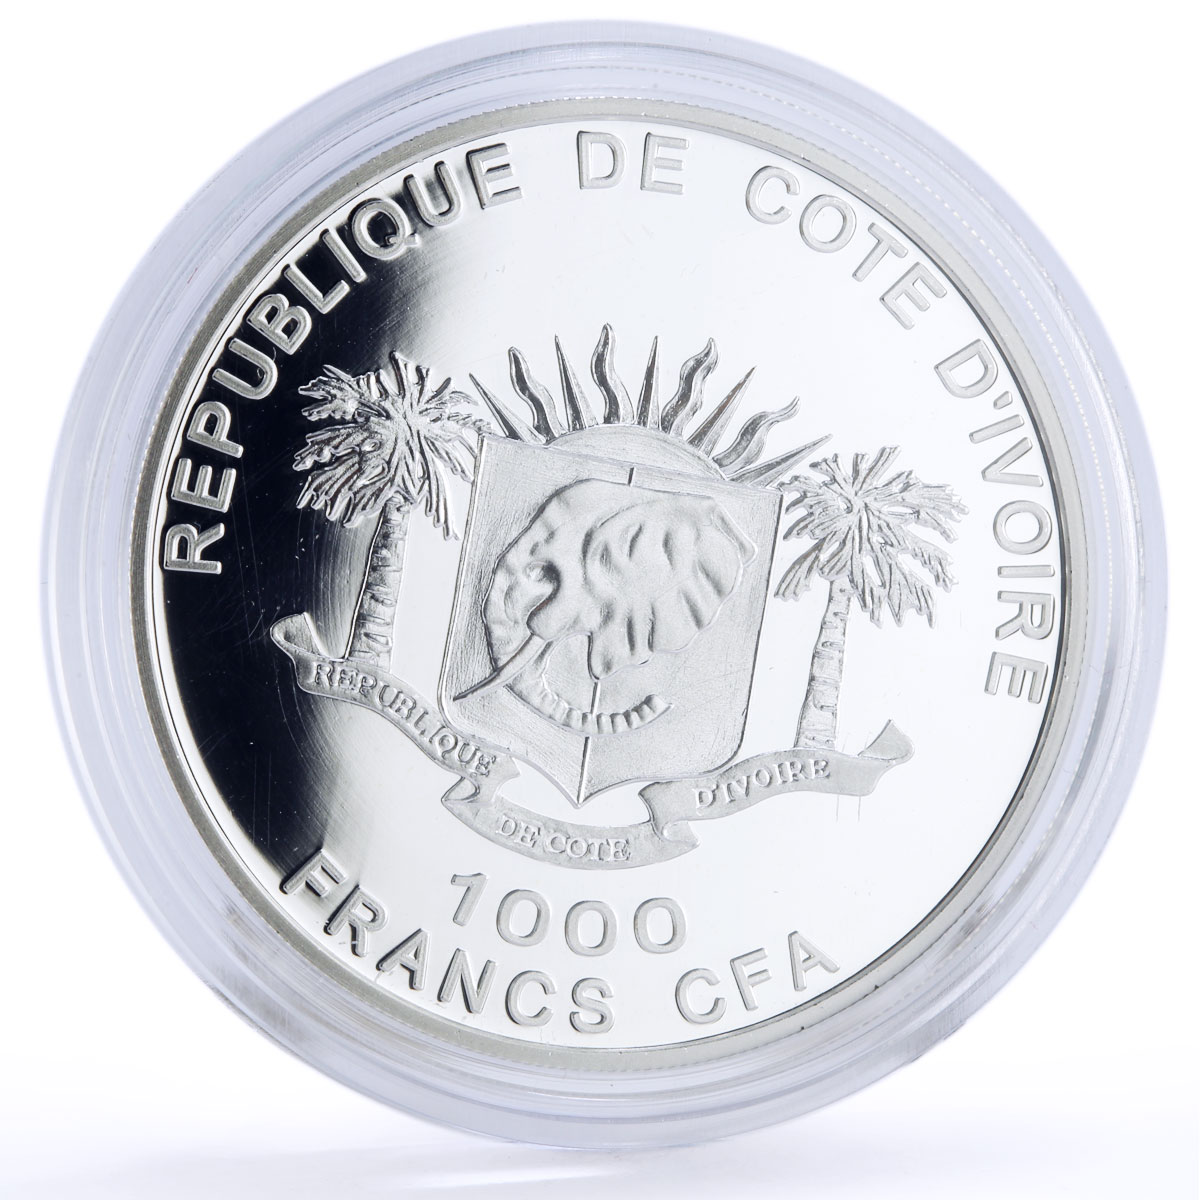 Ivory Coast 1000 francs Seafaring Sovereign of the Sea Ship silver coin 2013